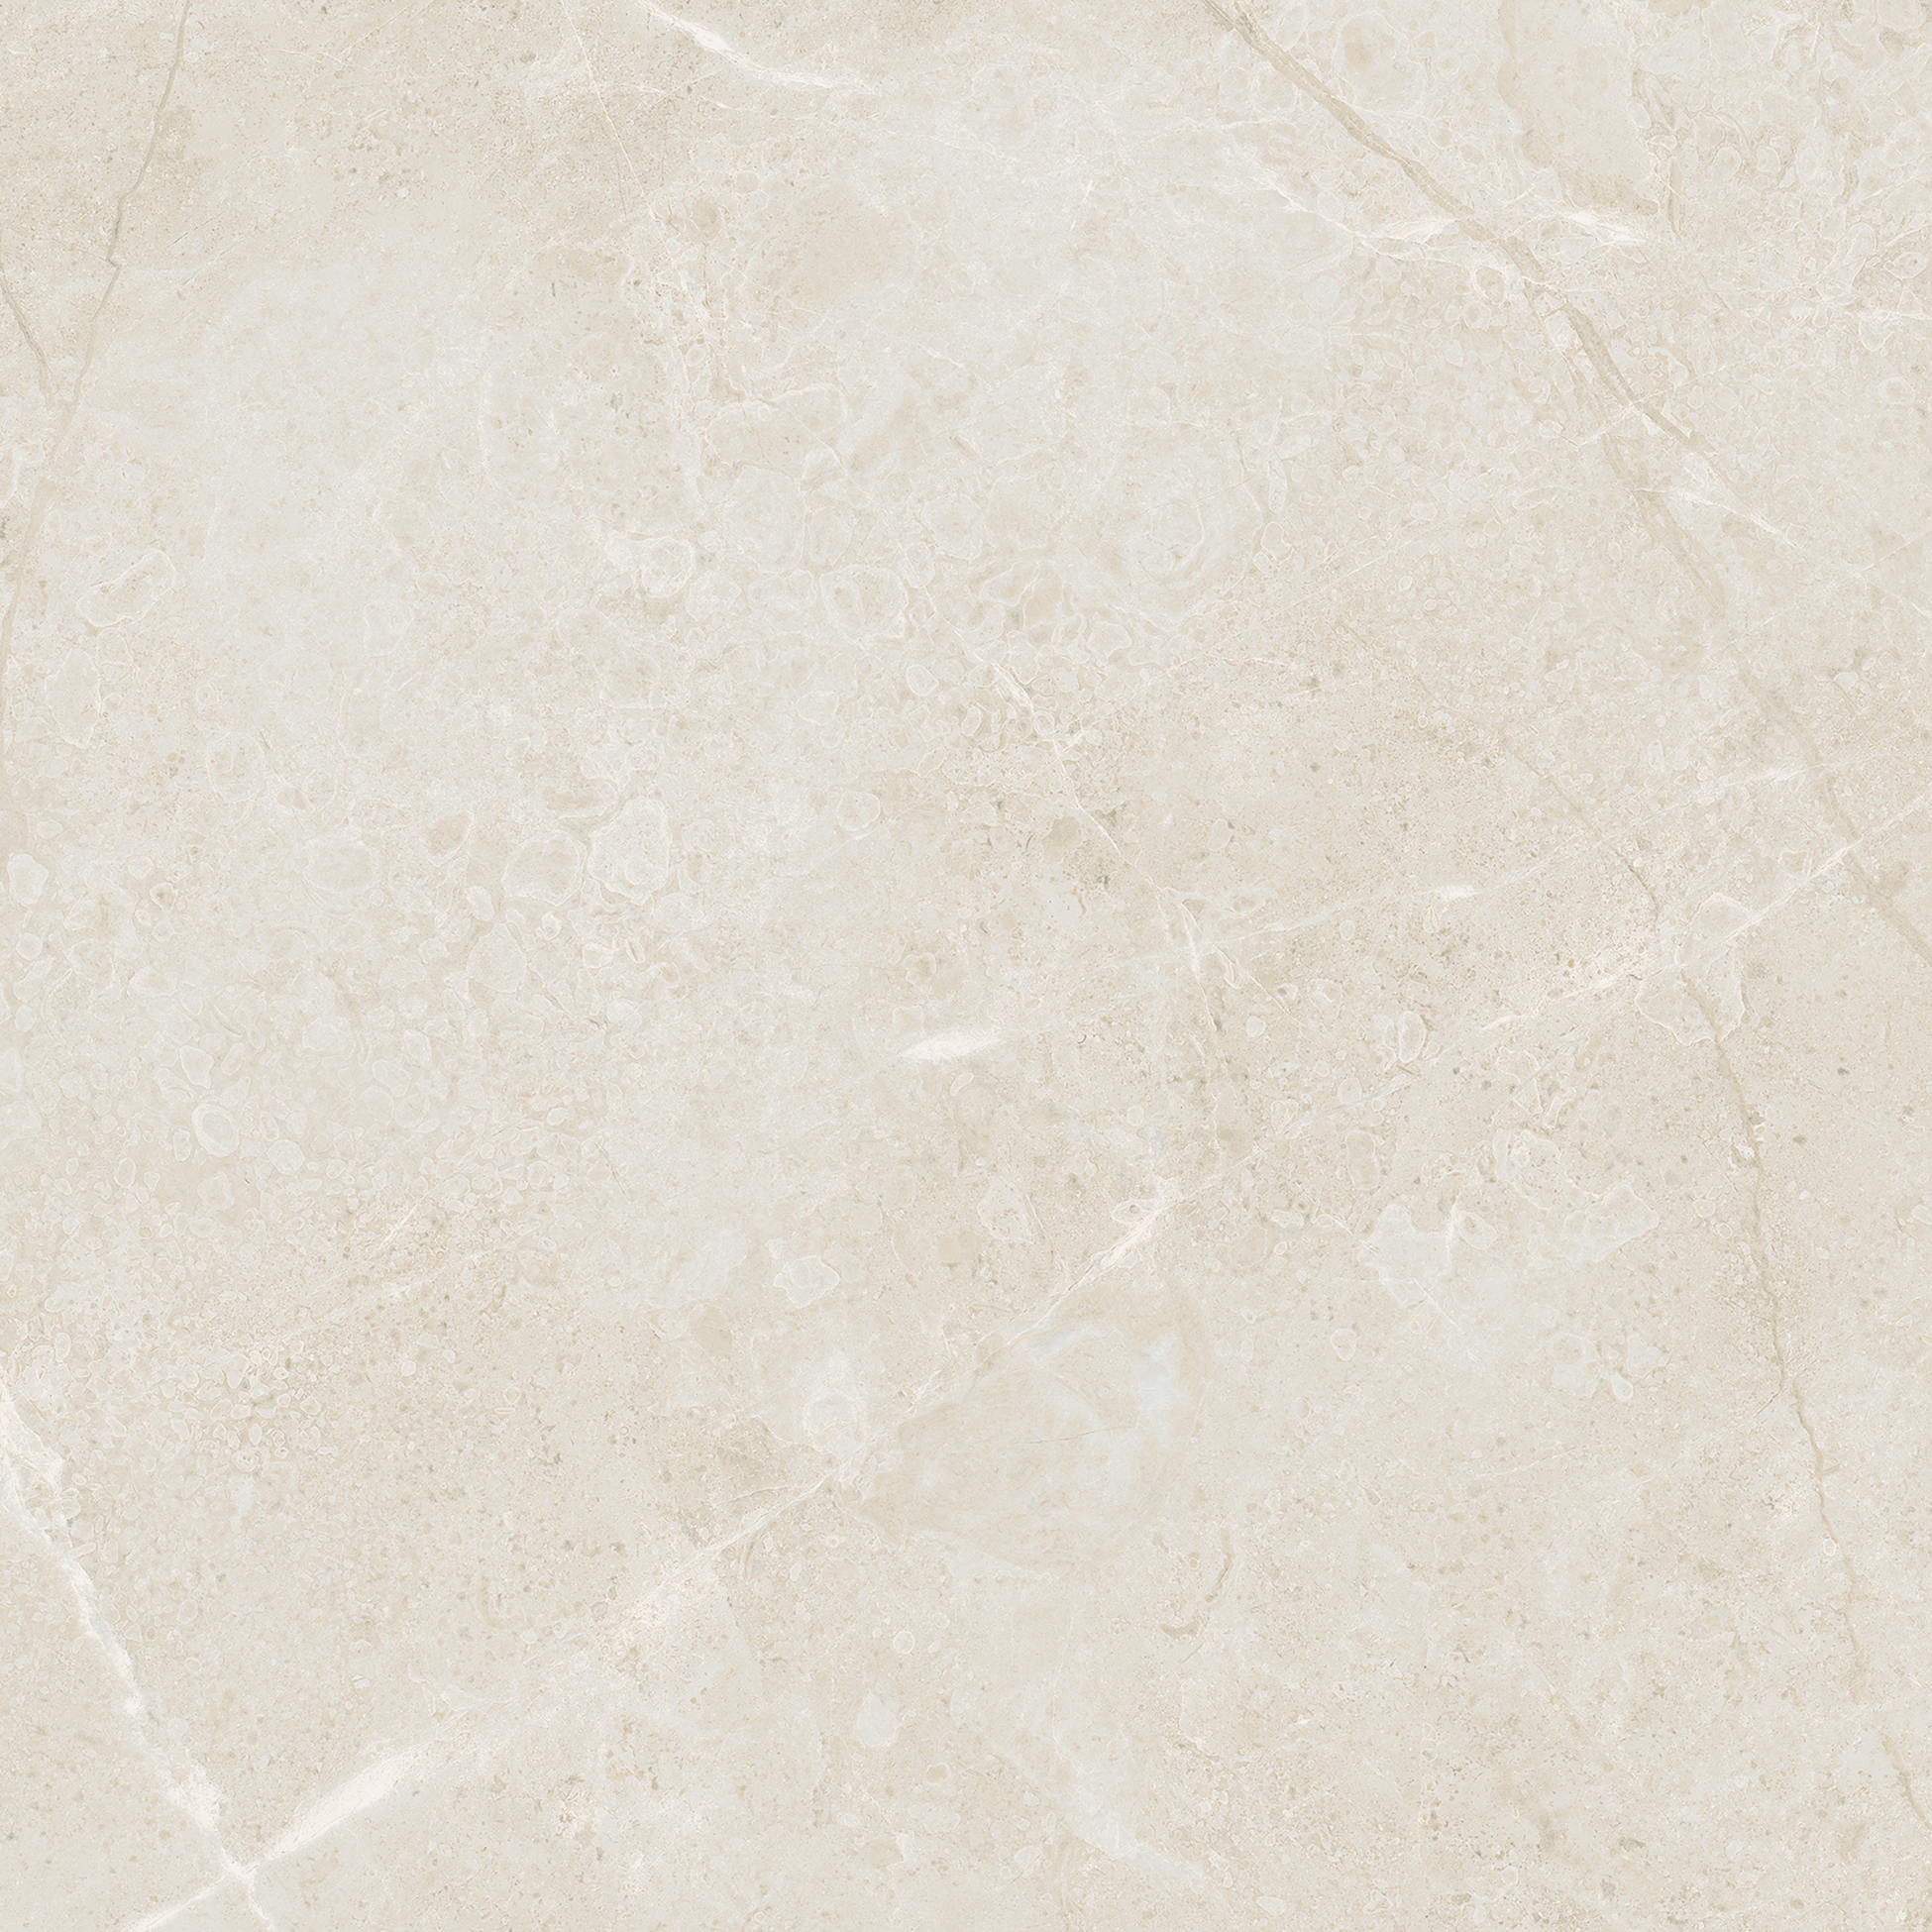 avorio pattern glazed porcelain field tile from torino anatolia collection distributed by surface group international matte finish pressed edge 13x13 square shape